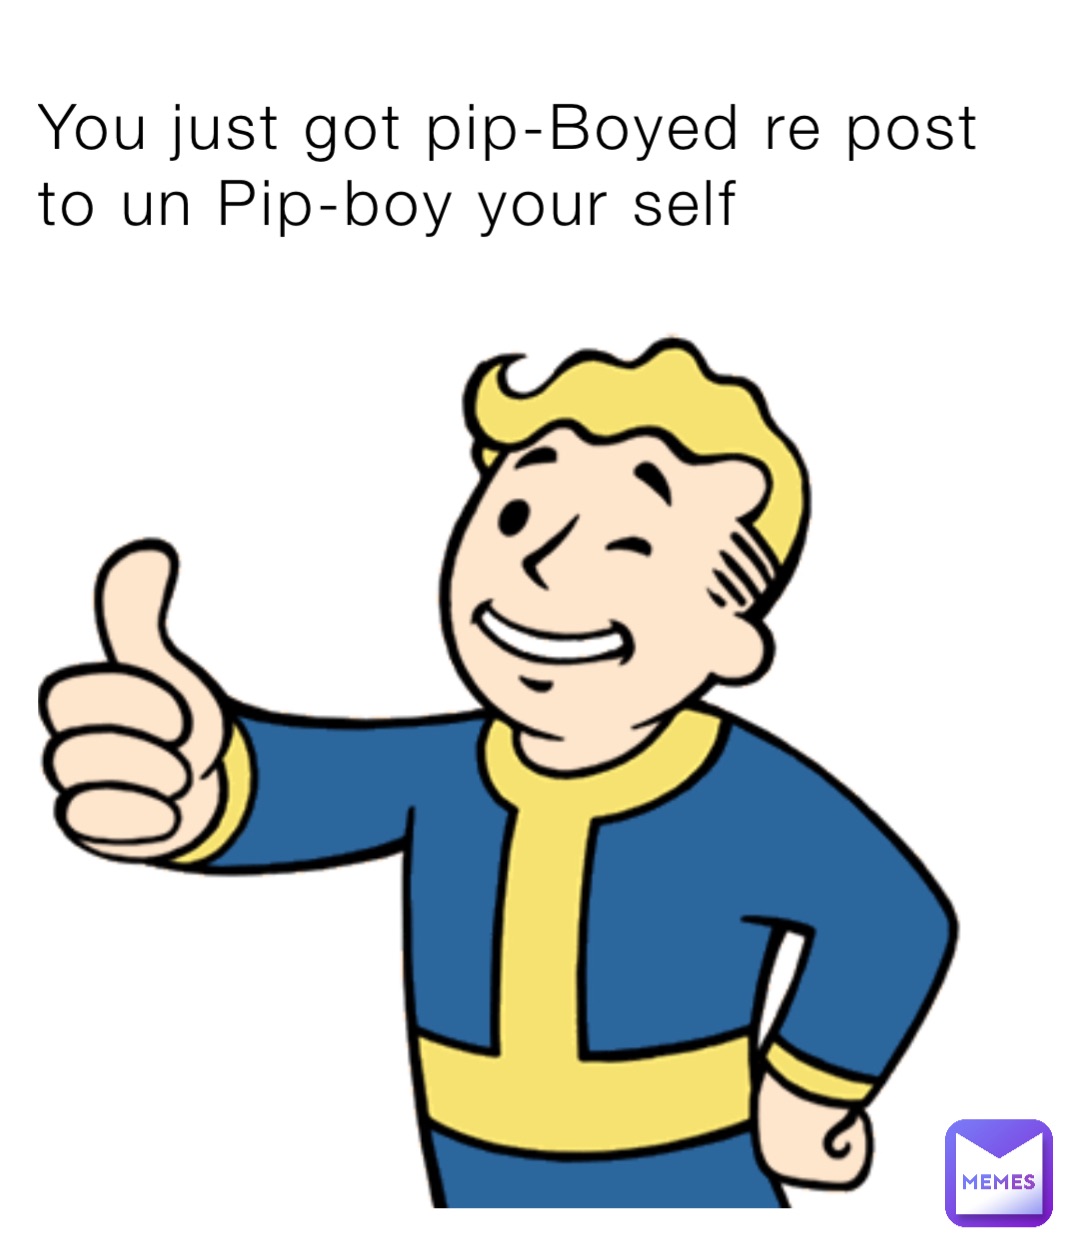 You just got pip-Boyed re post to un Pip-boy your self